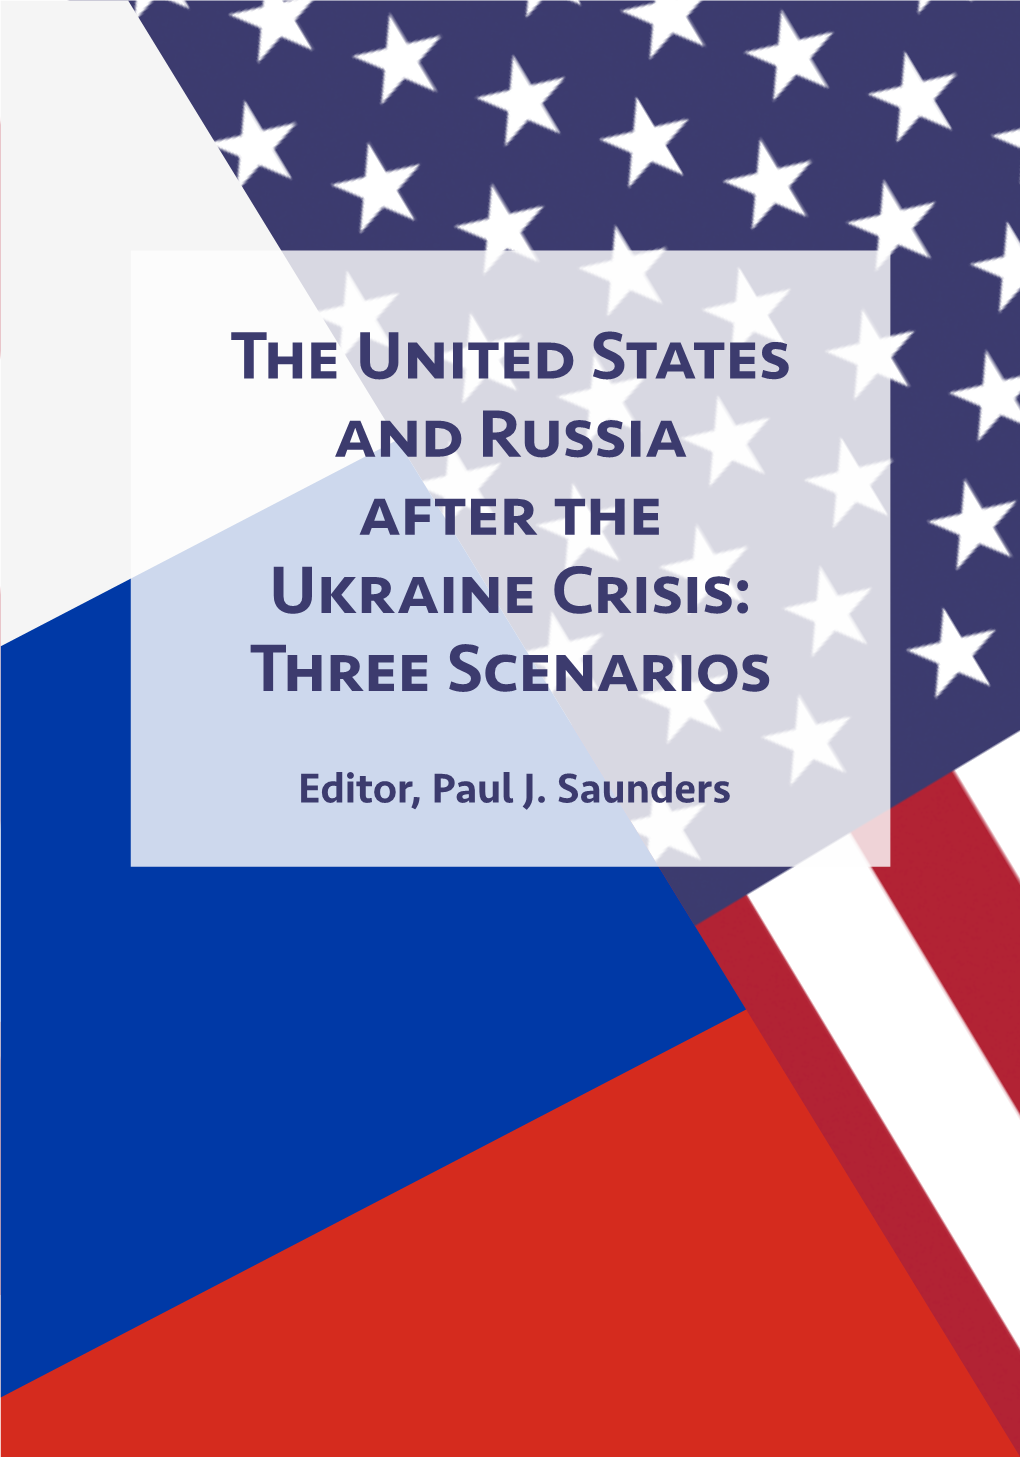 The United States and Russia After the Ukraine Crisis: Three Scenarios